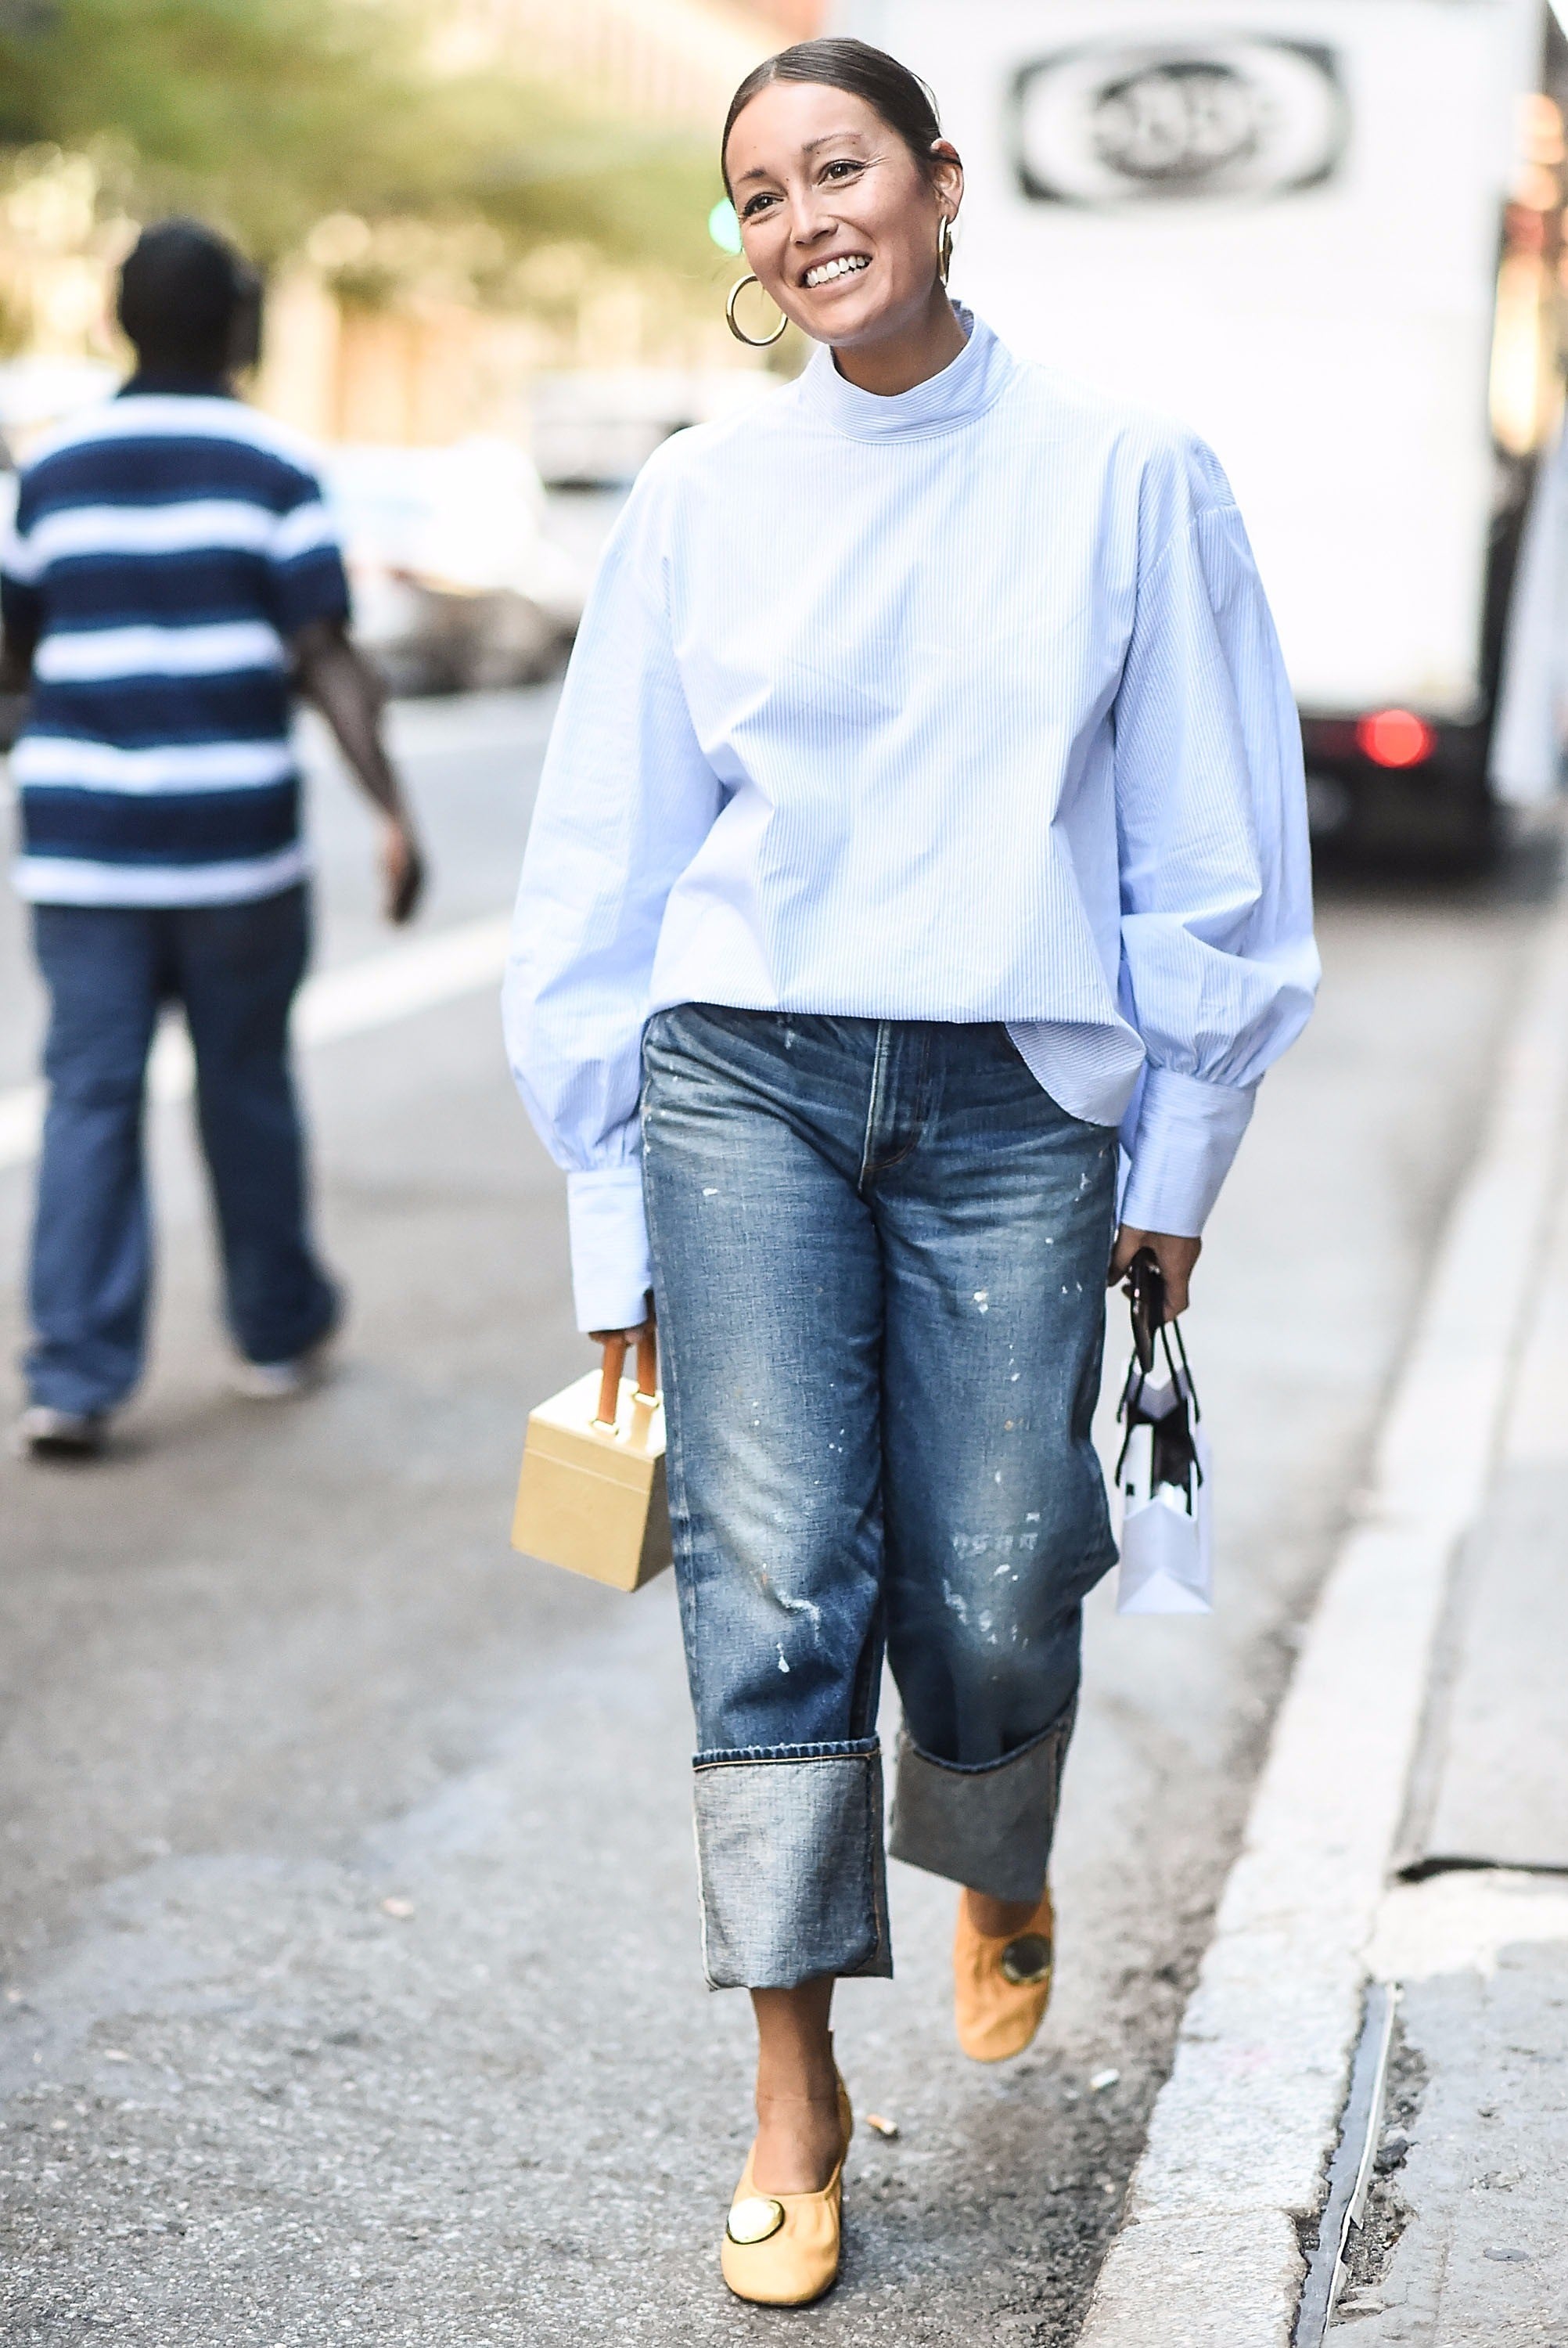 BIG CUFF JEANS ARE IN STYLE AND LOOK ULTRA CHIC - 50 IS NOT OLD - A Fashion  And Beauty Blog For Women Over 50